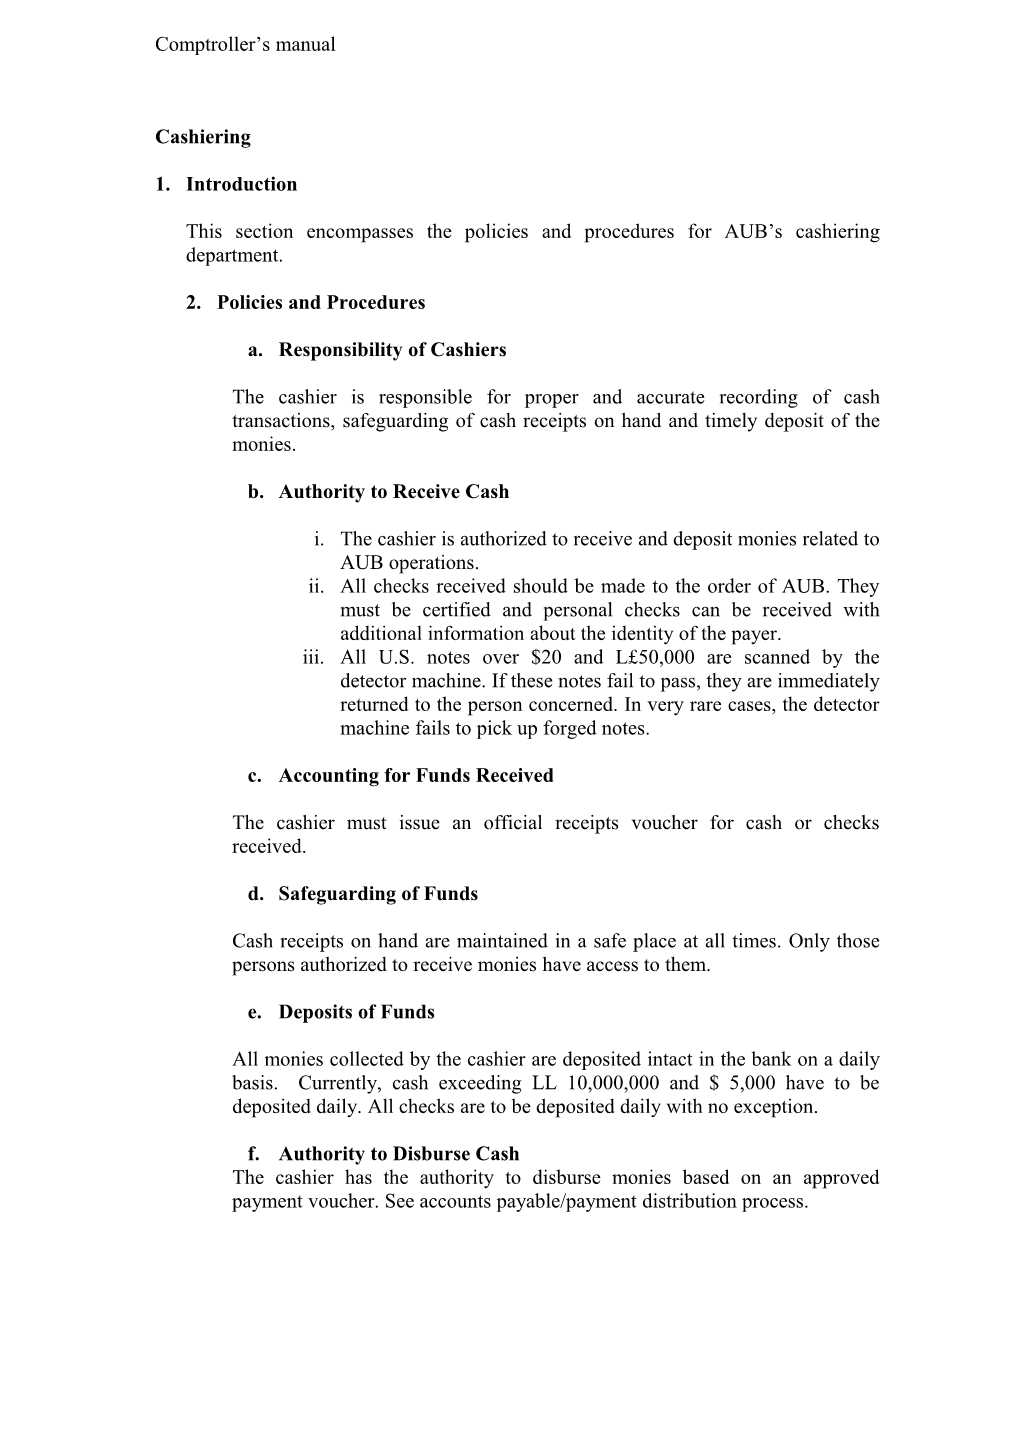 This Section Encompasses the Policies and Procedures for AUB S Cashiering Department